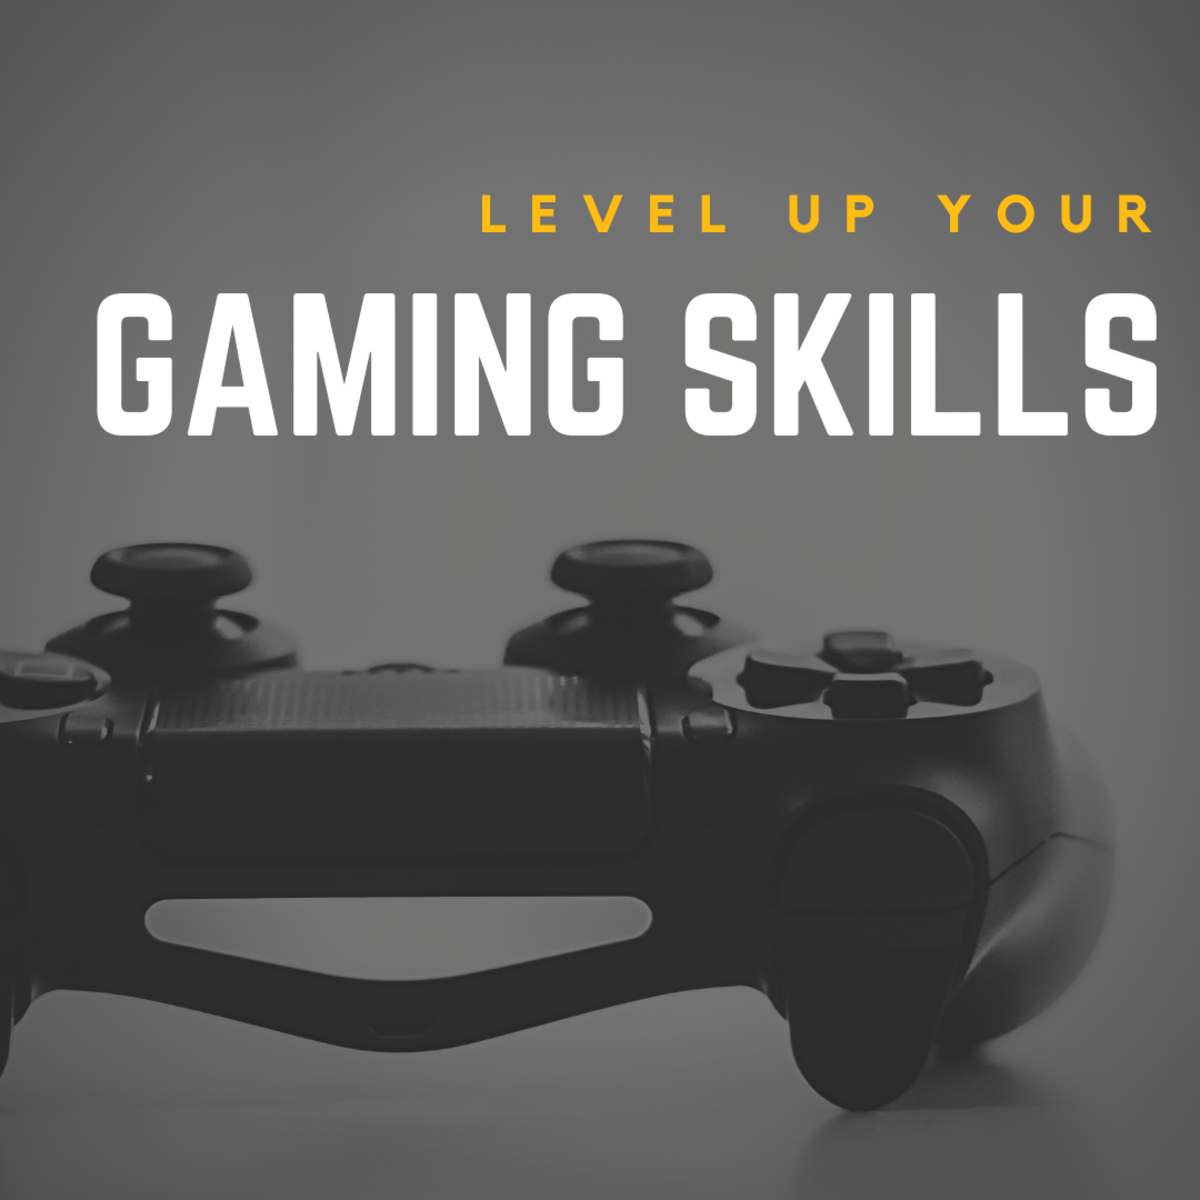 Gaming Skills That Can Help You in the Real World